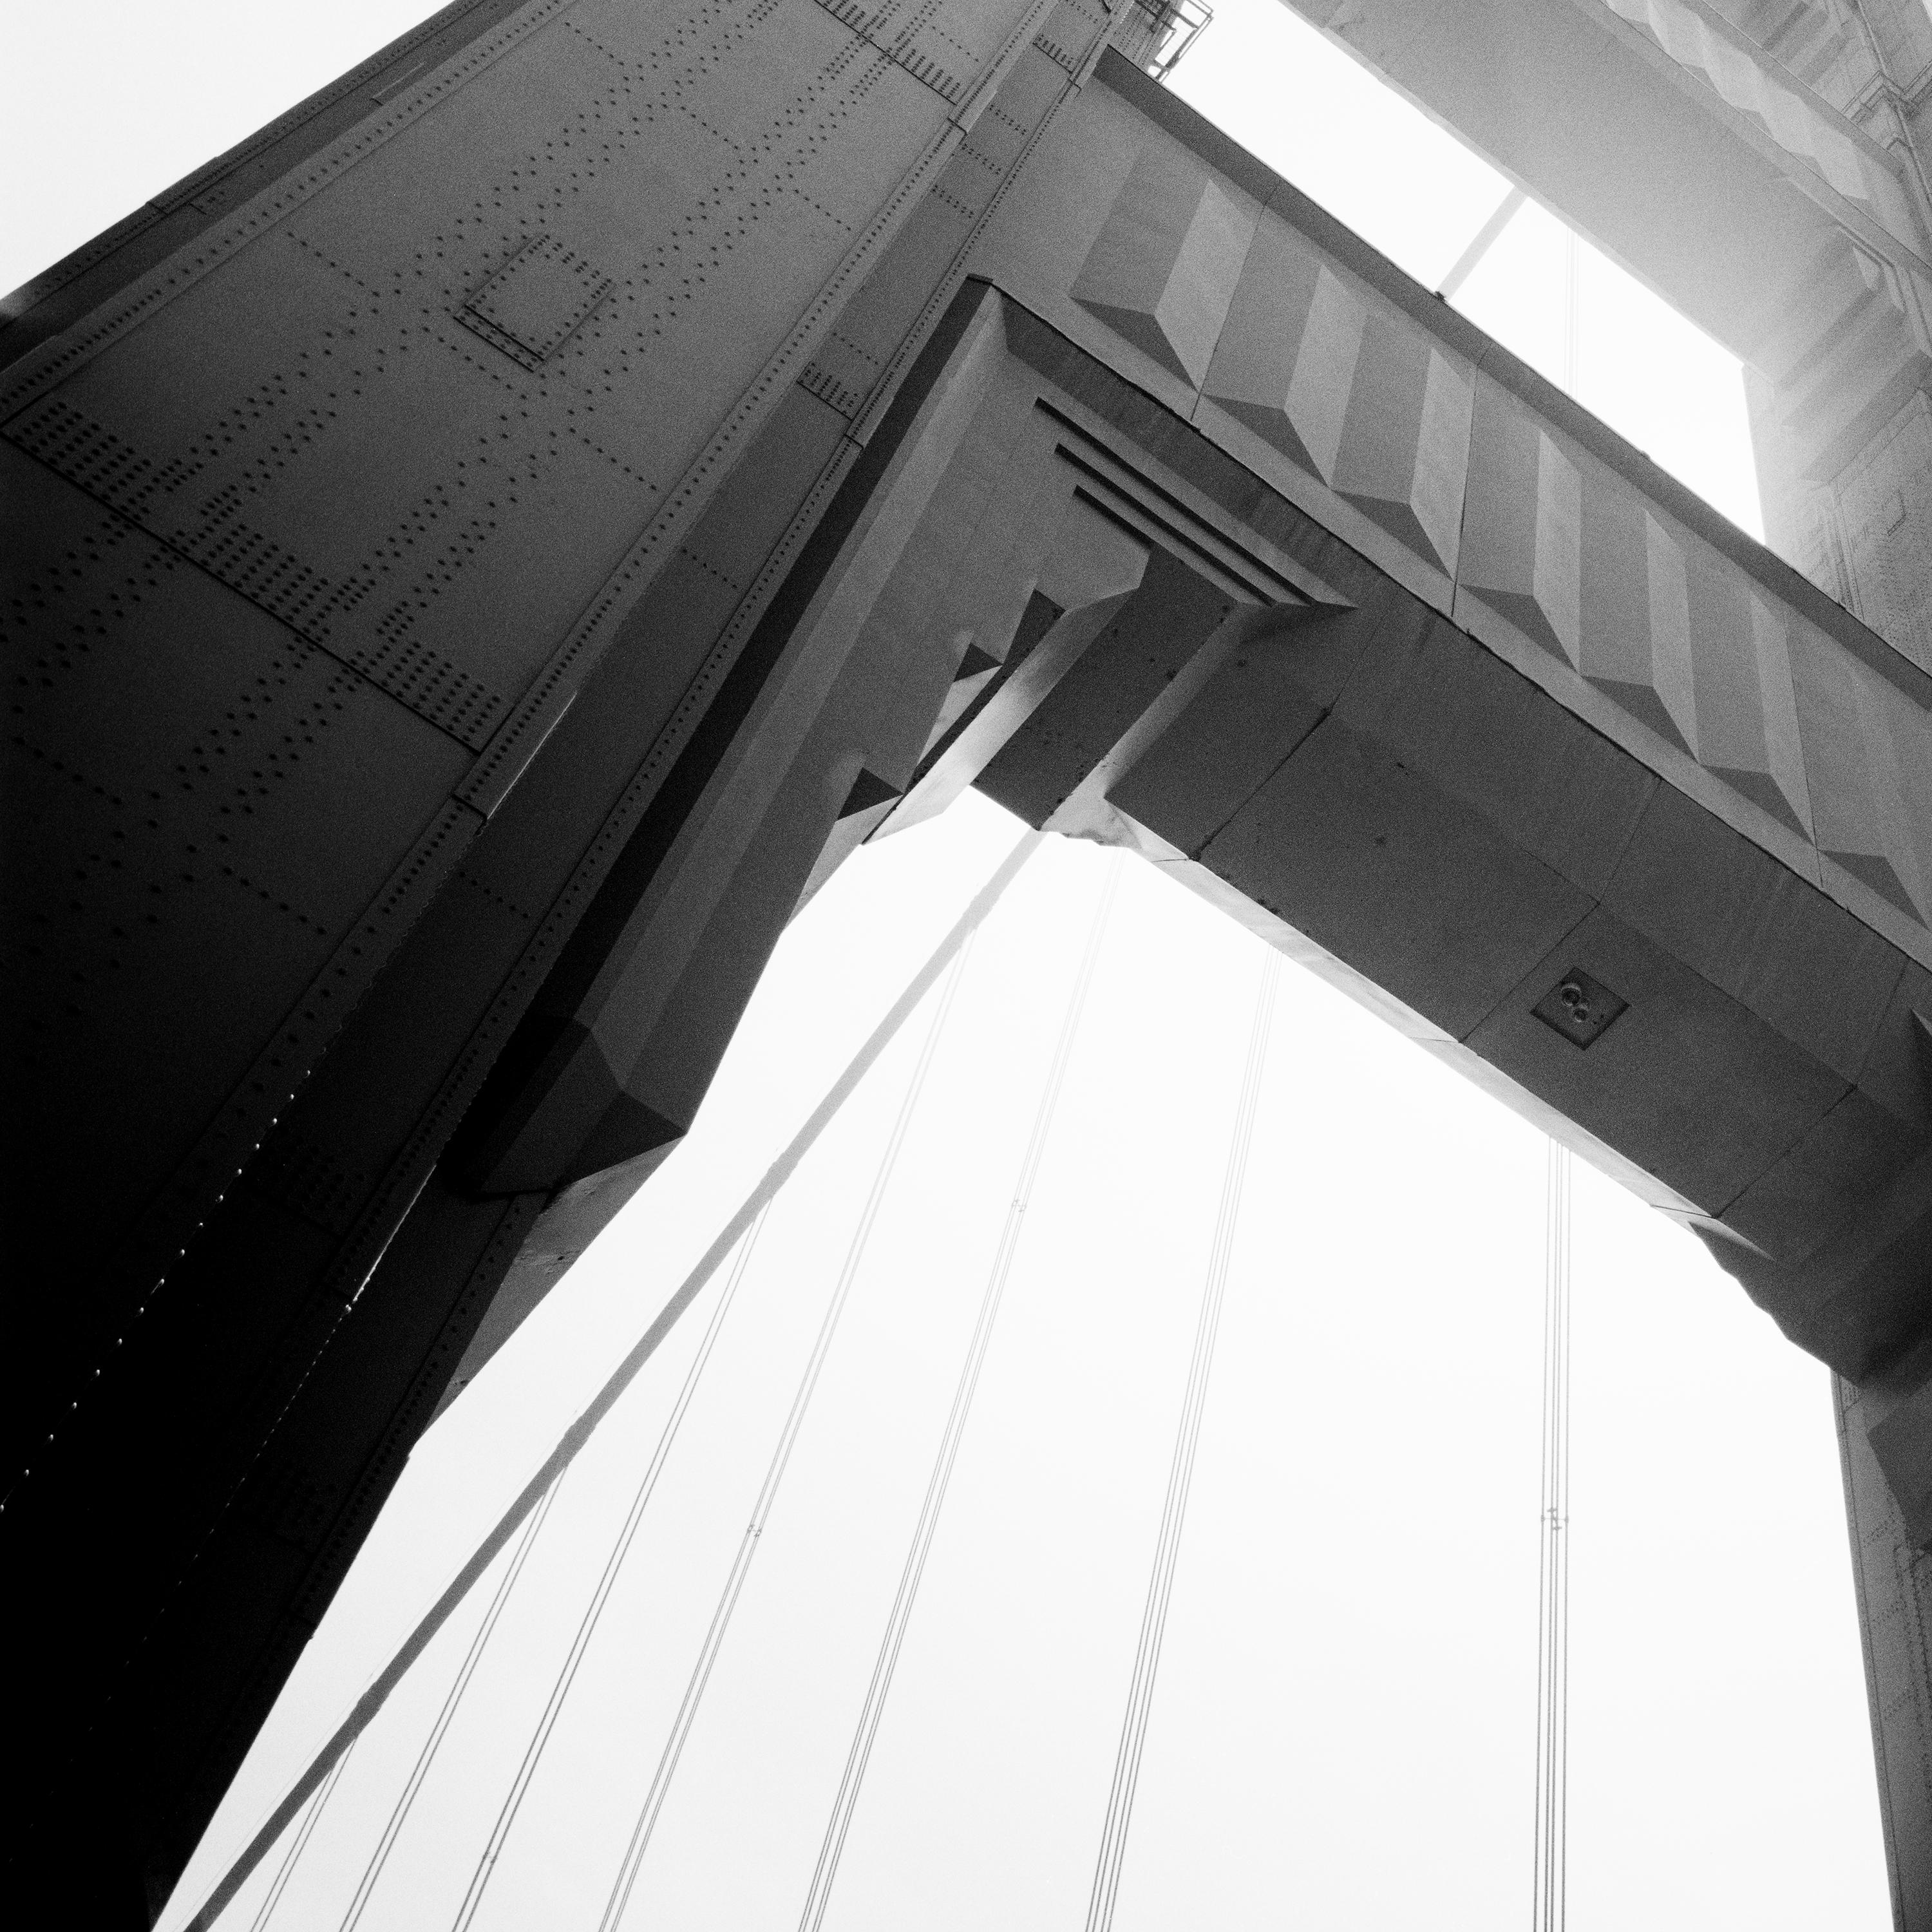 Golden Gate Bridge, Tower, San Francisco, USA, black and white art photography For Sale 4